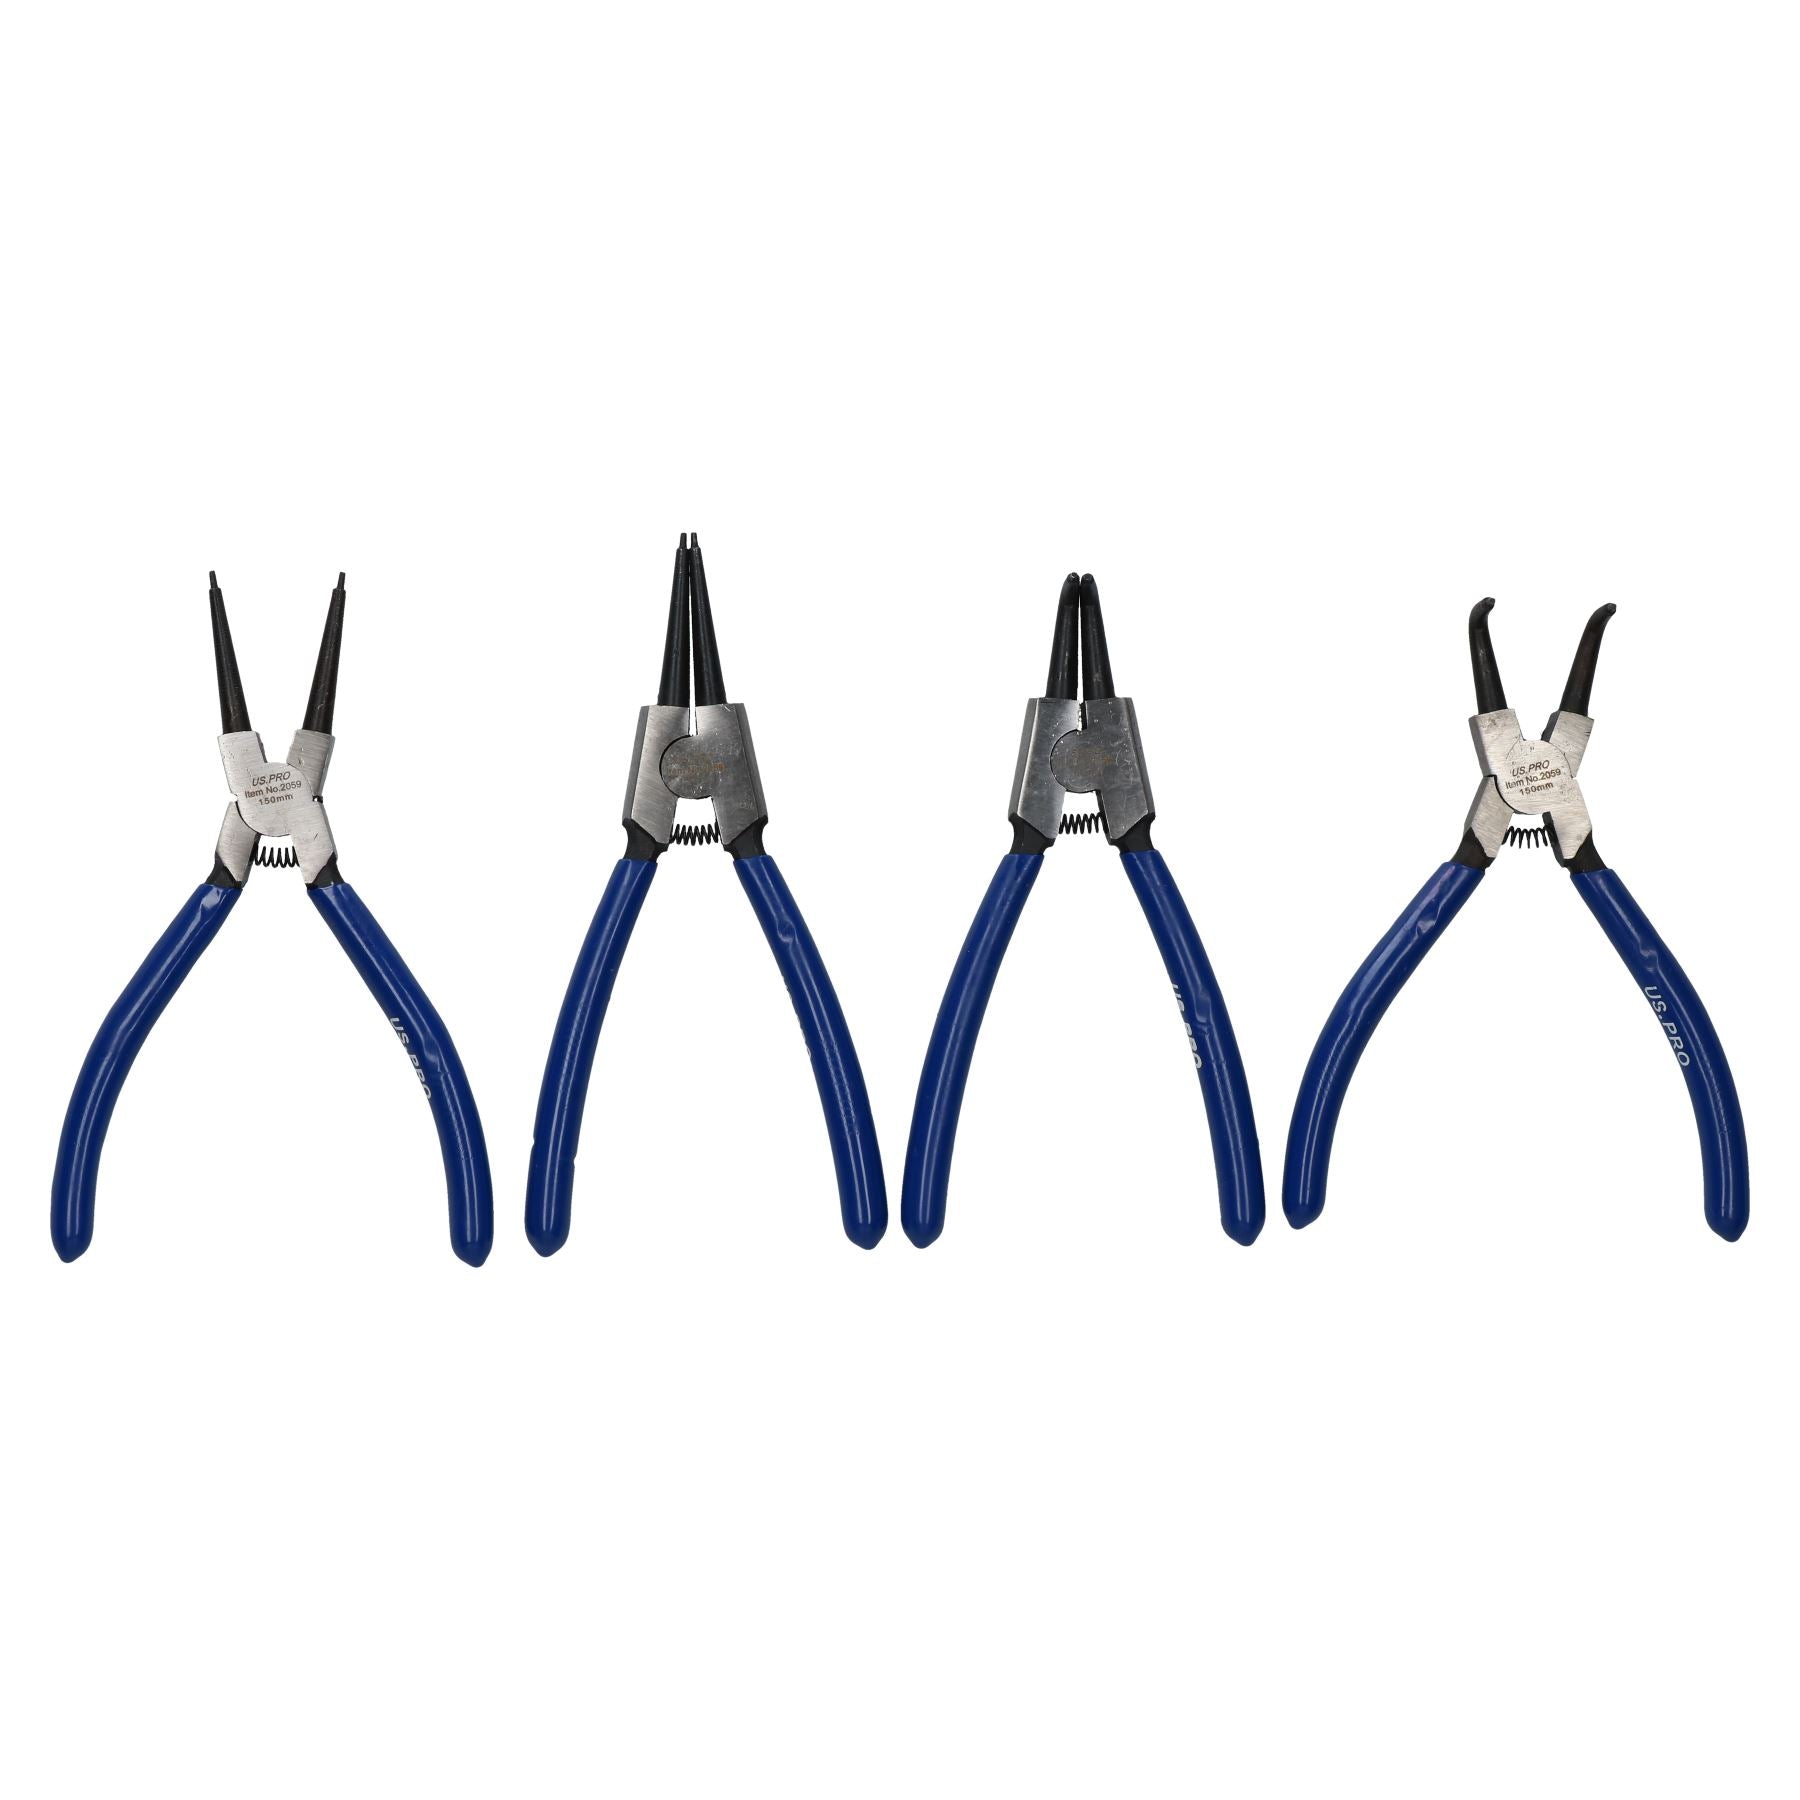 6" 150mm Internal And external Bent And Straight Circlip Plier Set In Carry Case